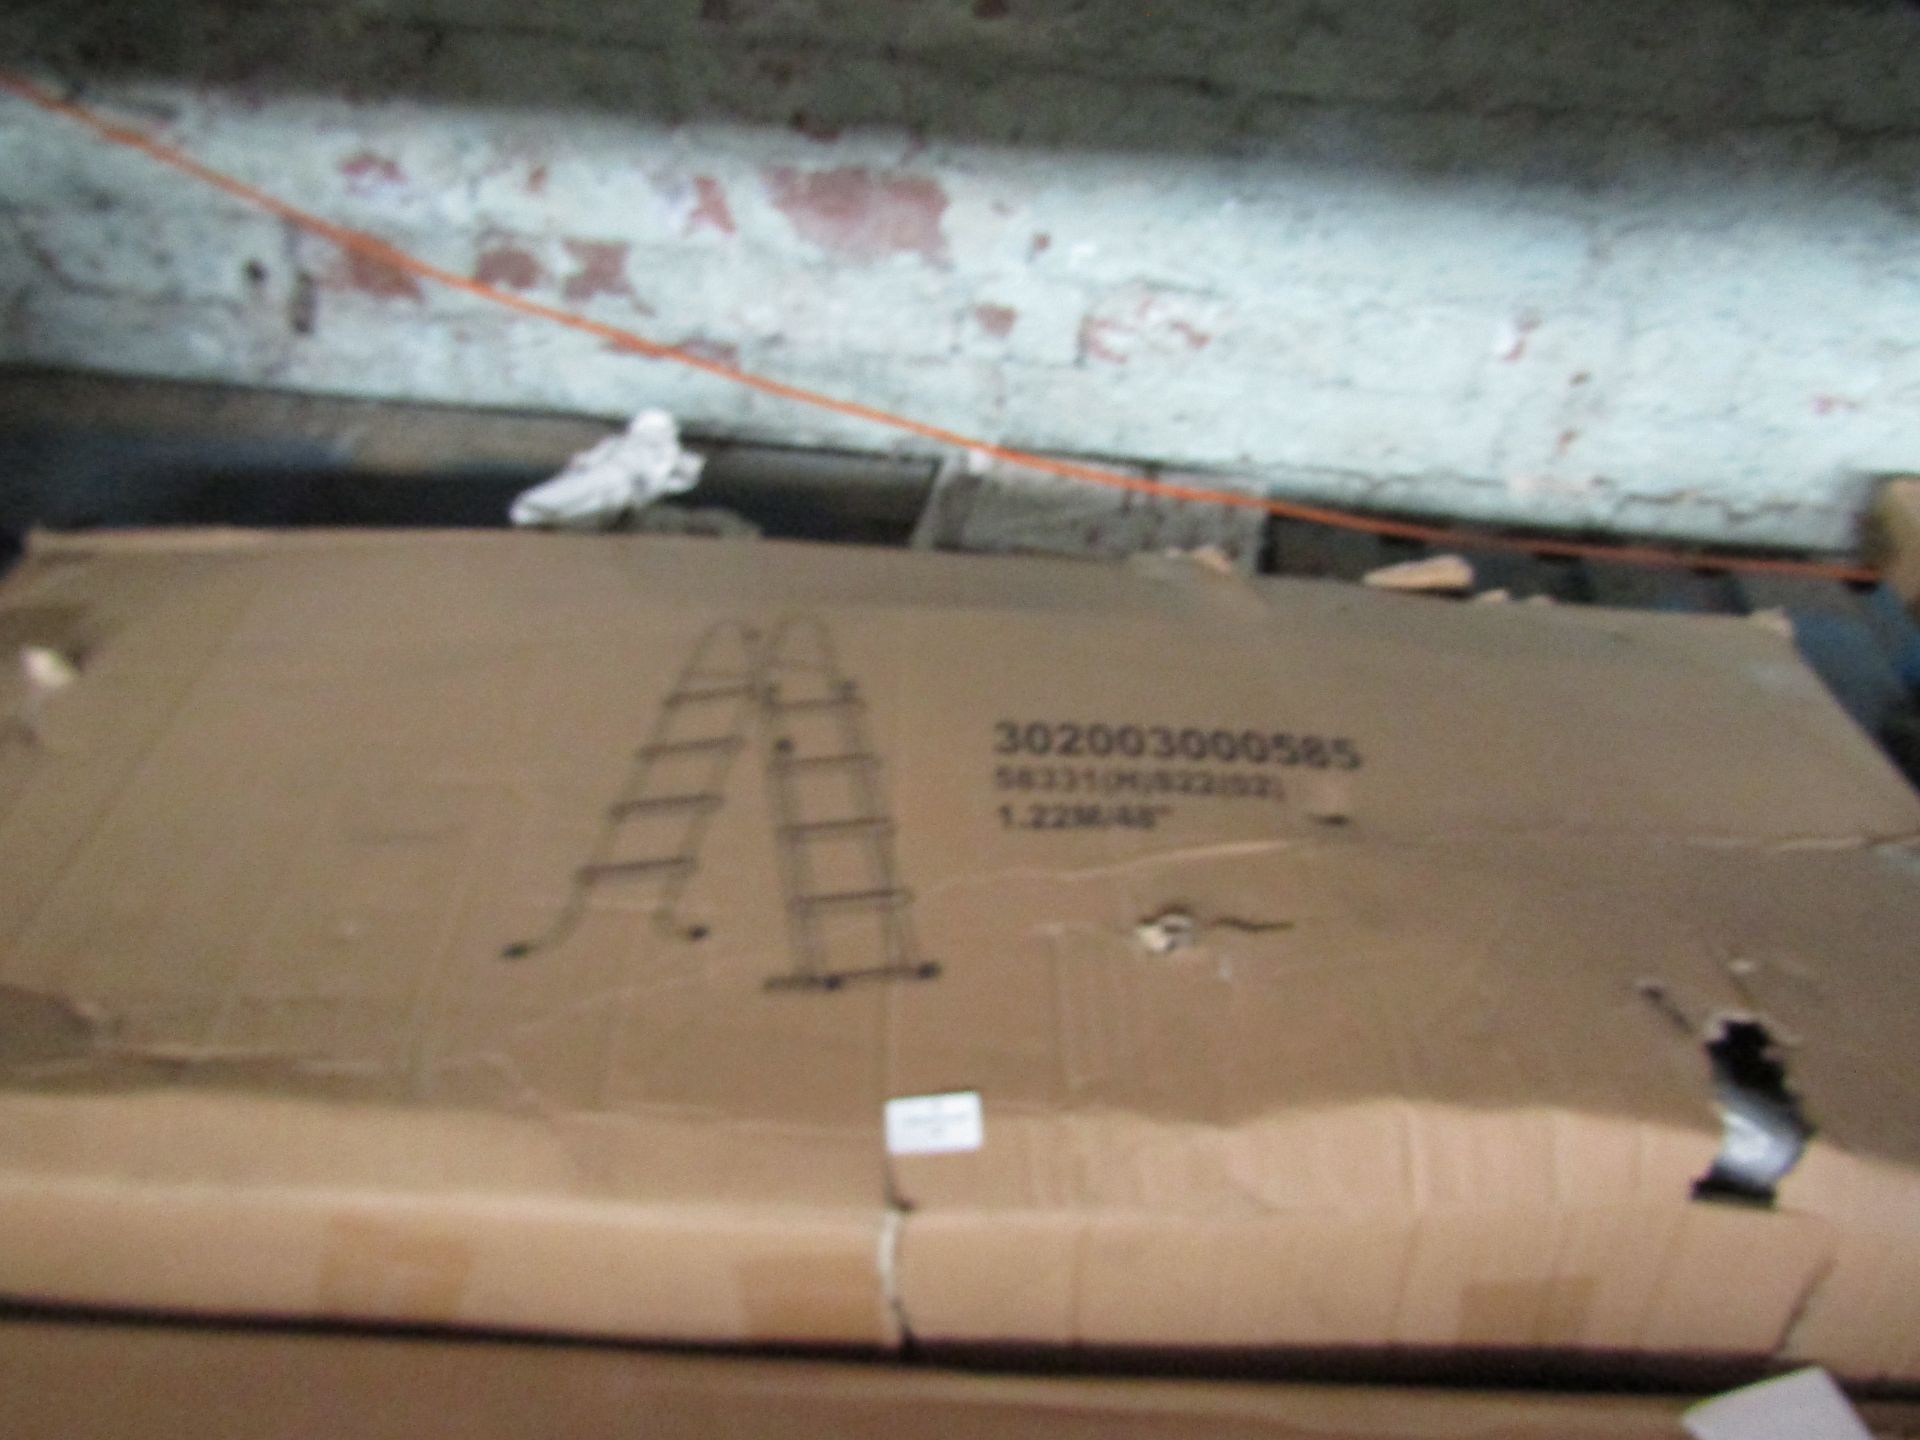 Pool Ladders 1.22m Tall - Unchecked & Boxed.